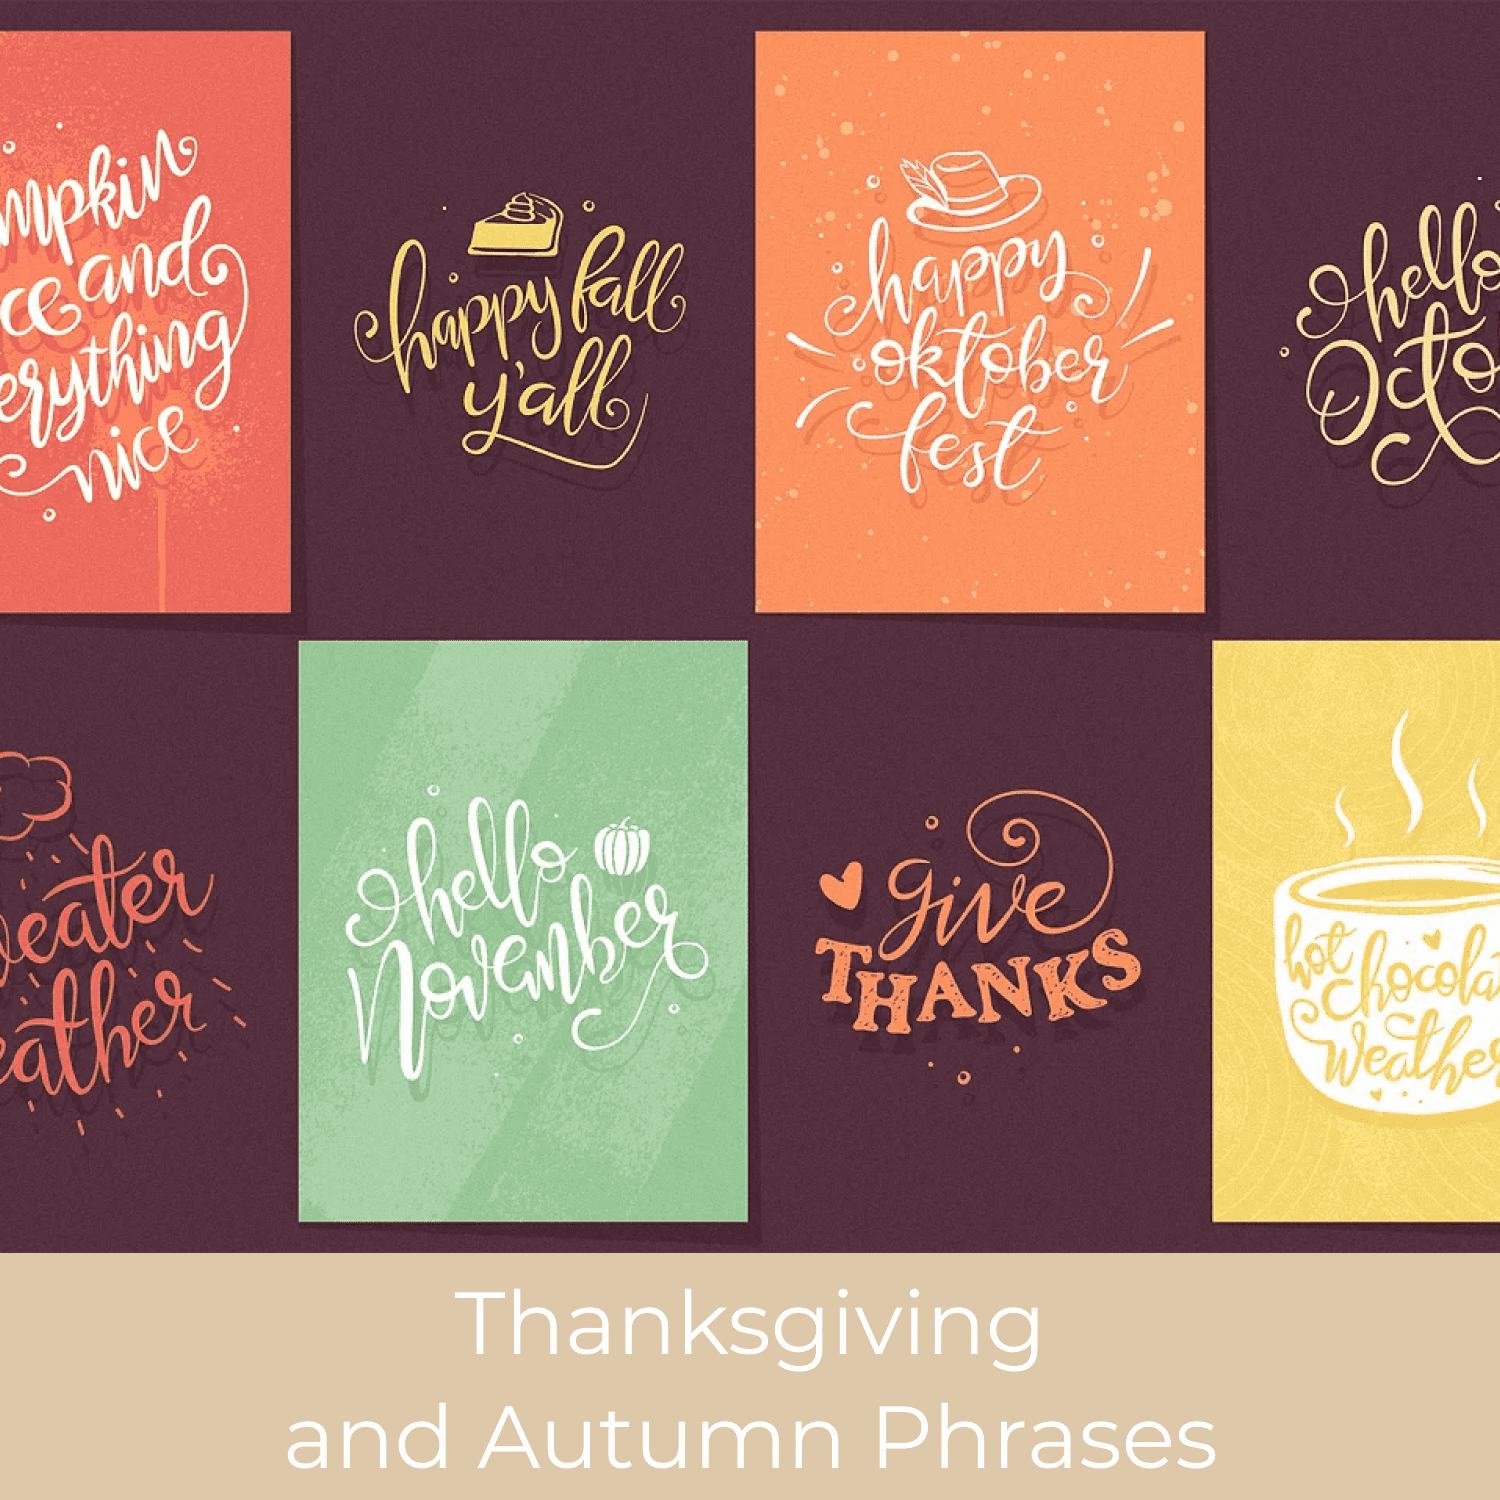 Thanksgiving and Autumn Phrases cover.